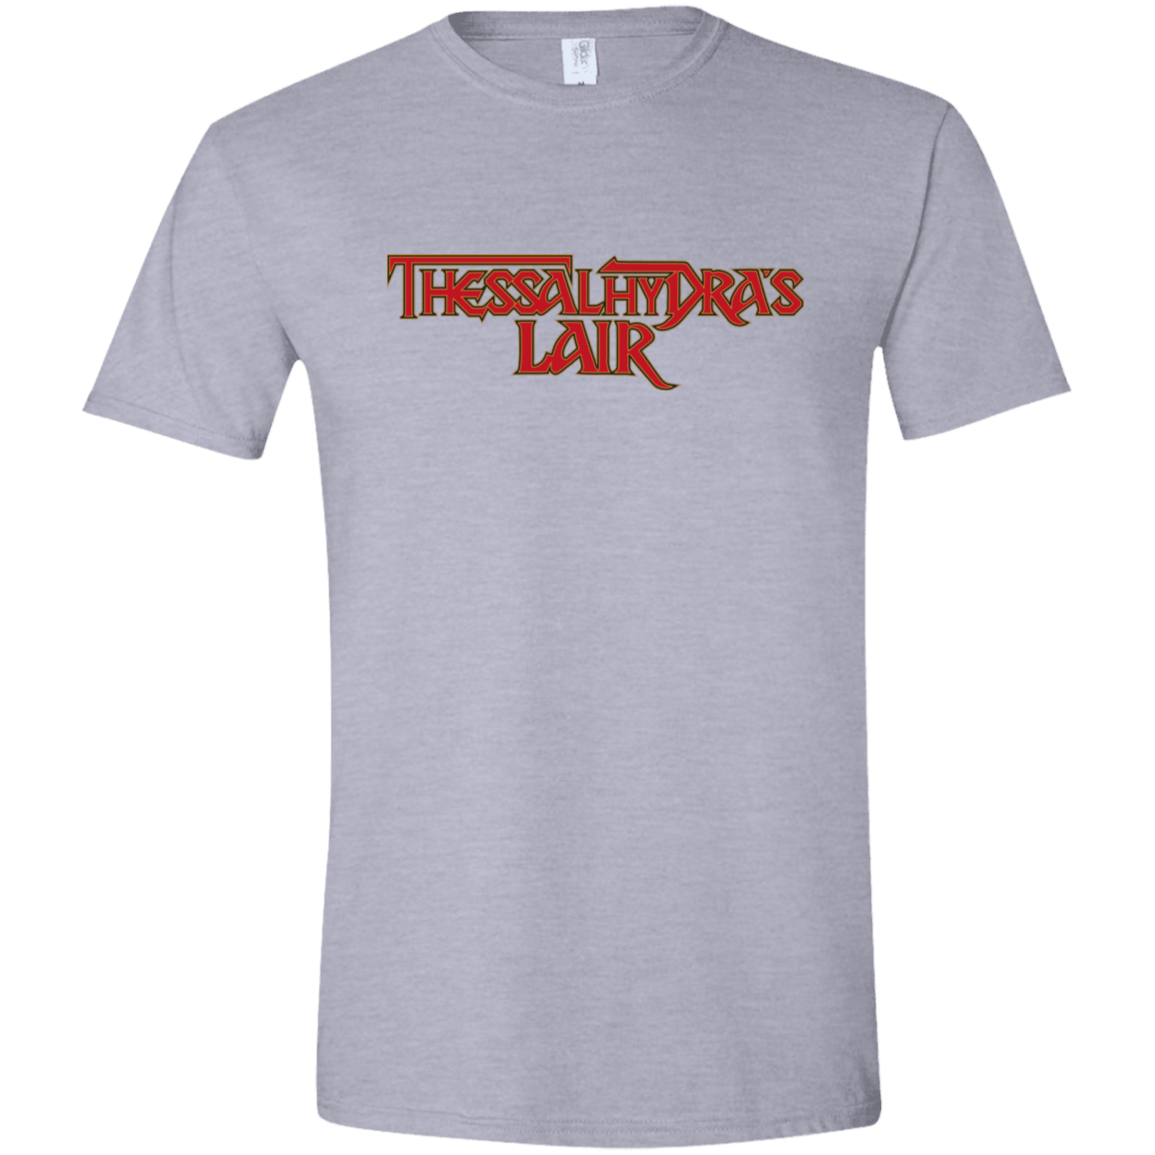 T-Shirts Sport Grey / X-Small Thessalhydras Lair Men's Semi-Fitted Softstyle